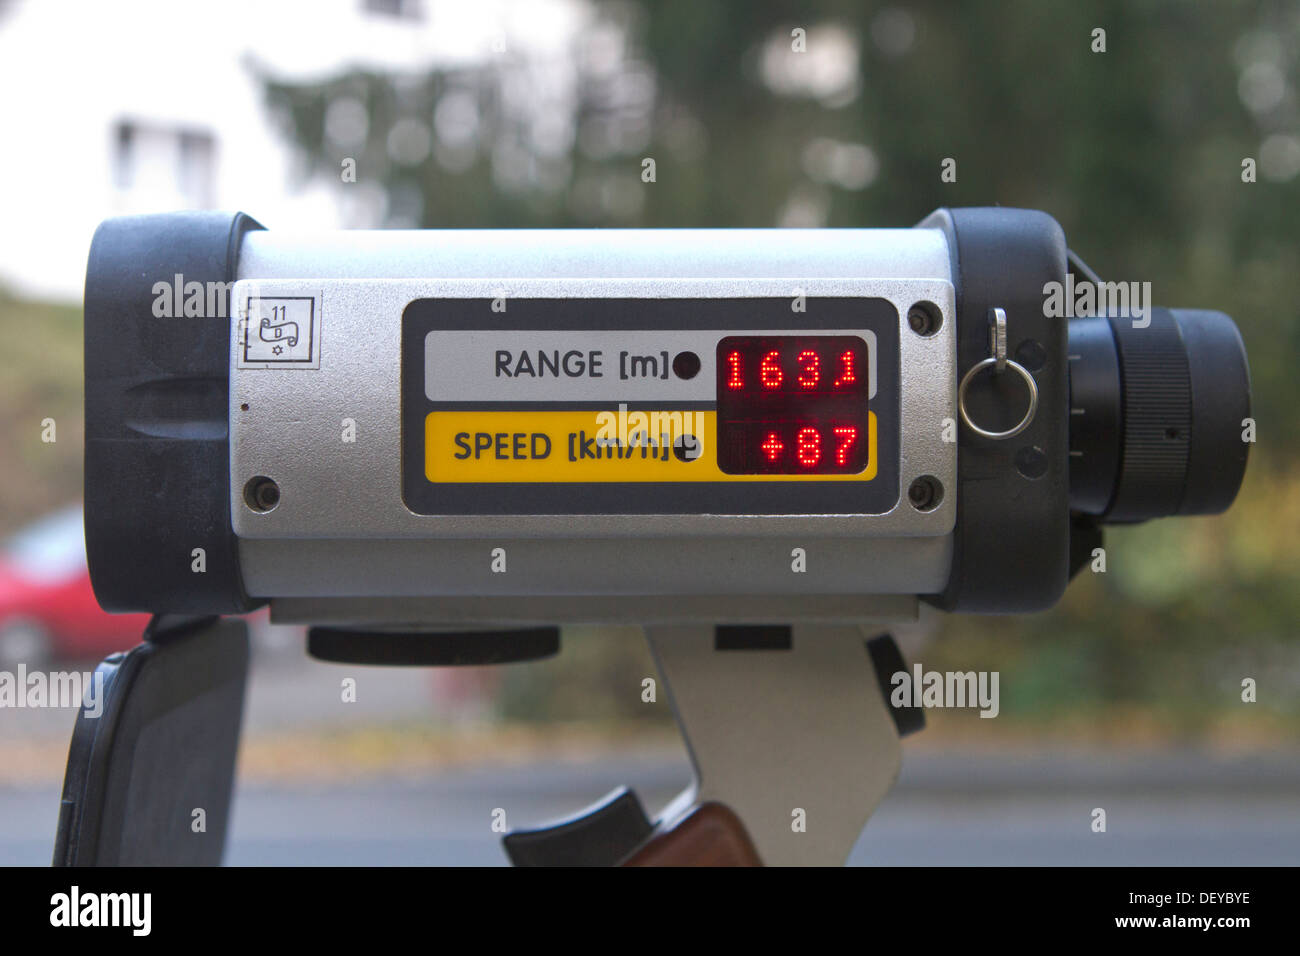 Radar gun showing speed and distance data, the car is going 87 km/h in a 70km/h zone, speed control, on 24/10/2012 Stock Photo